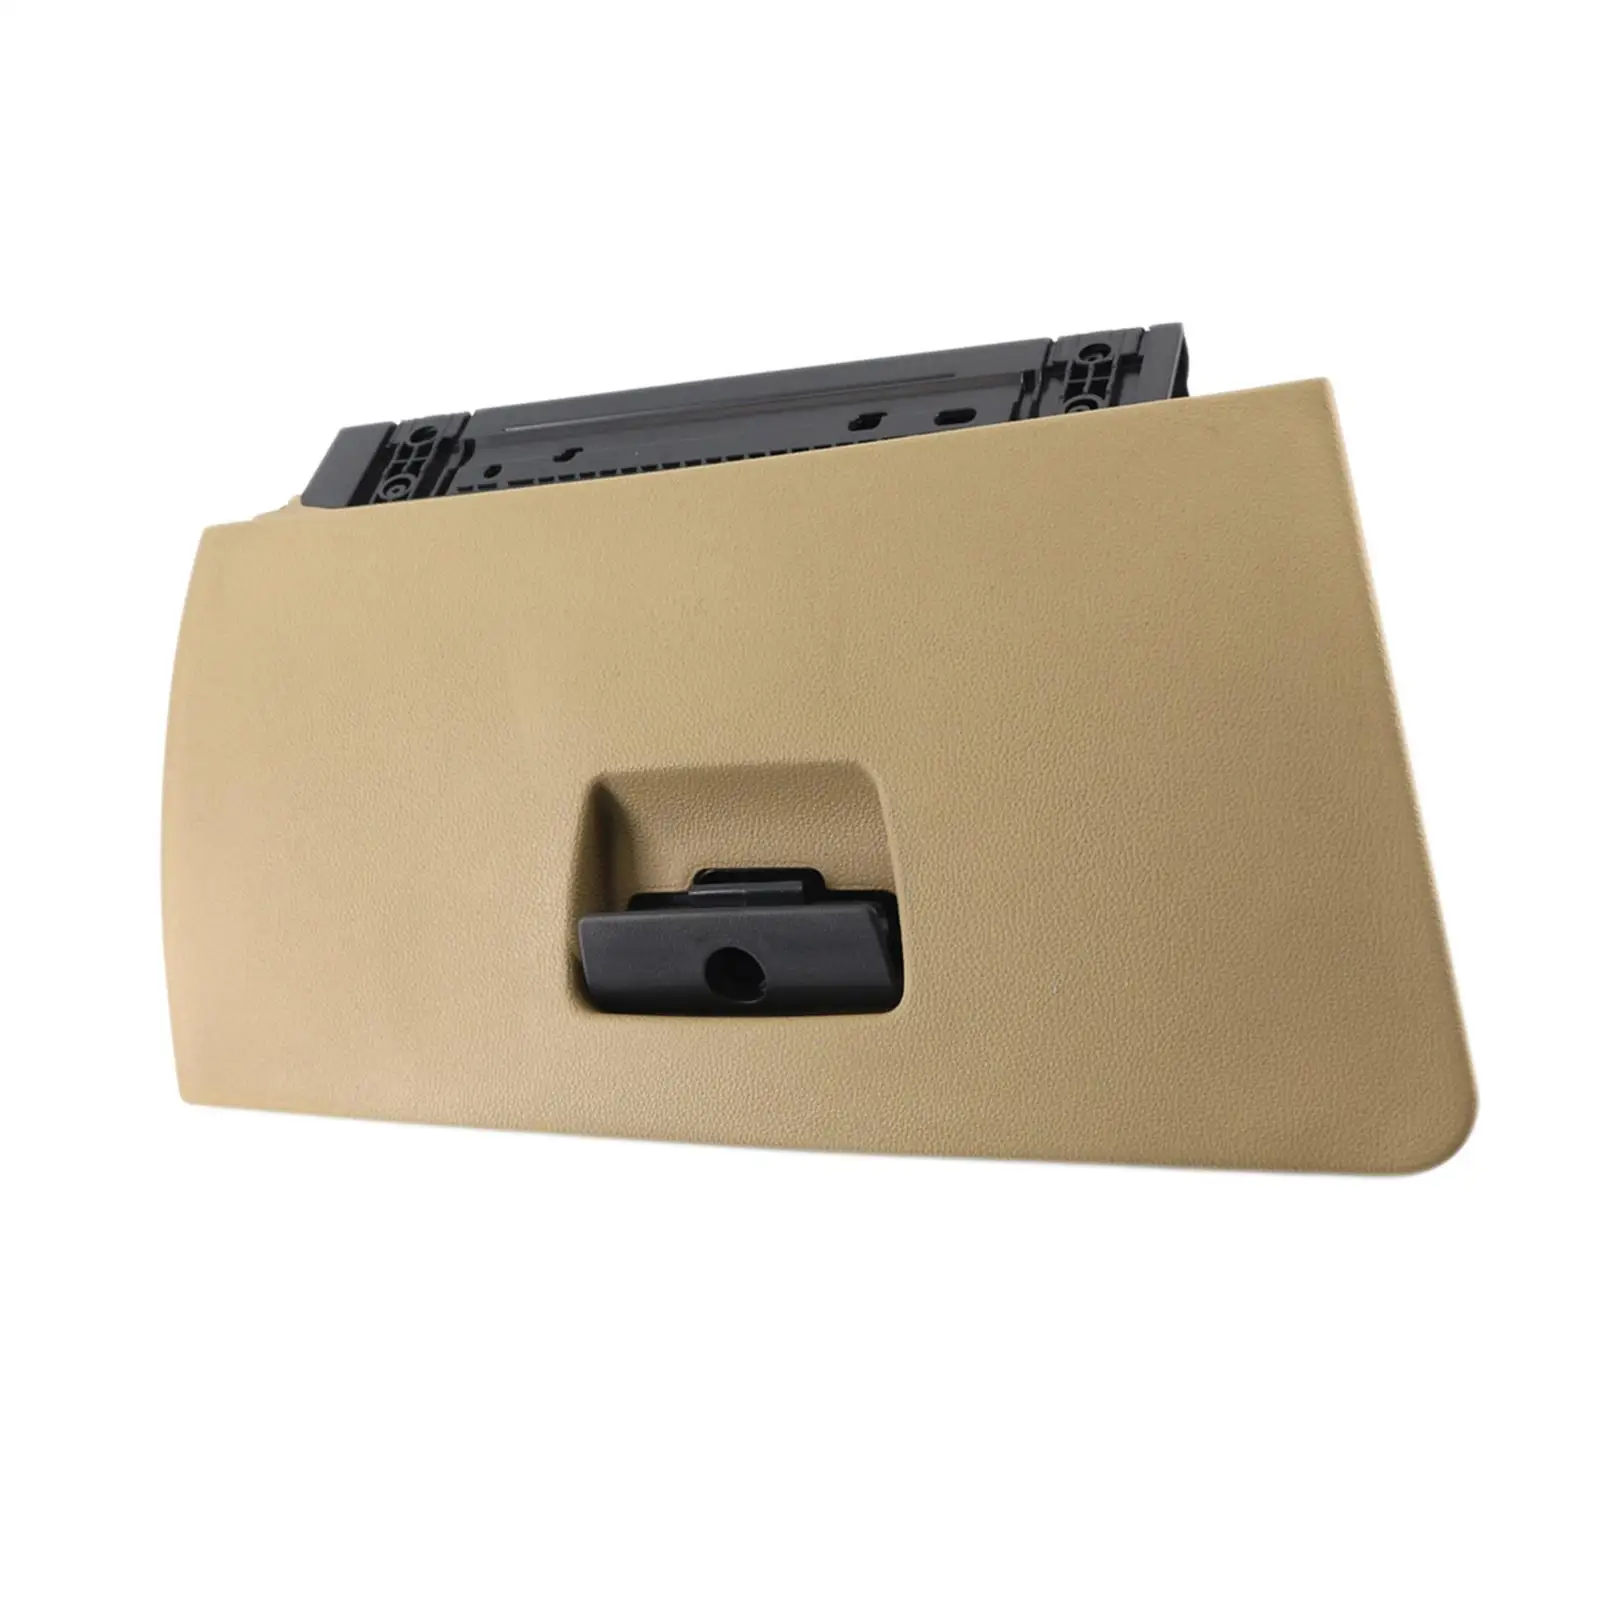 Glovebox Accessory Replaces Professional Easy to Install Durable Glove Box Storage Compartment for BMW E90 D91 E92 06-13